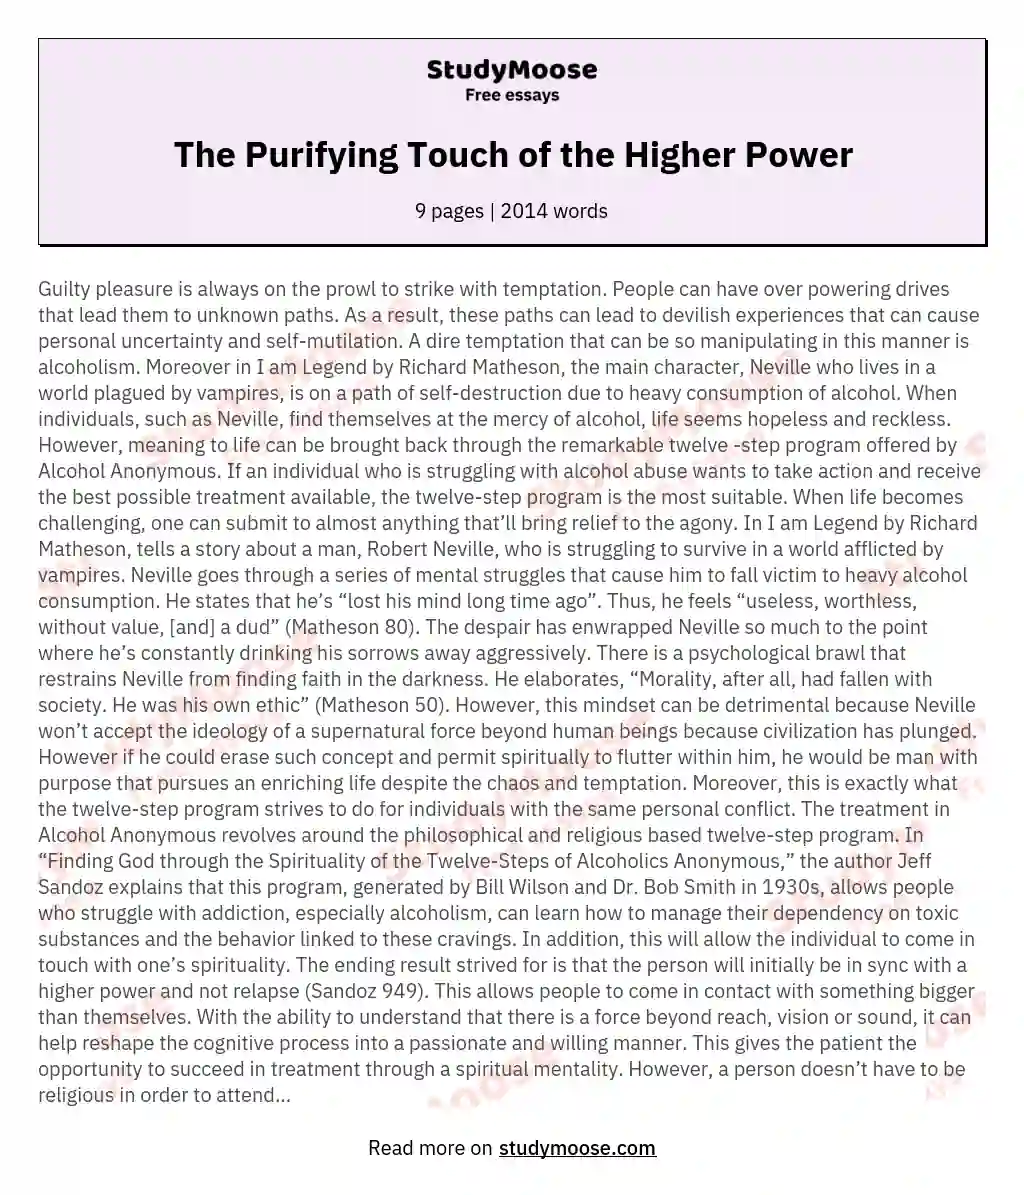 The Purifying Touch of the Higher Power essay